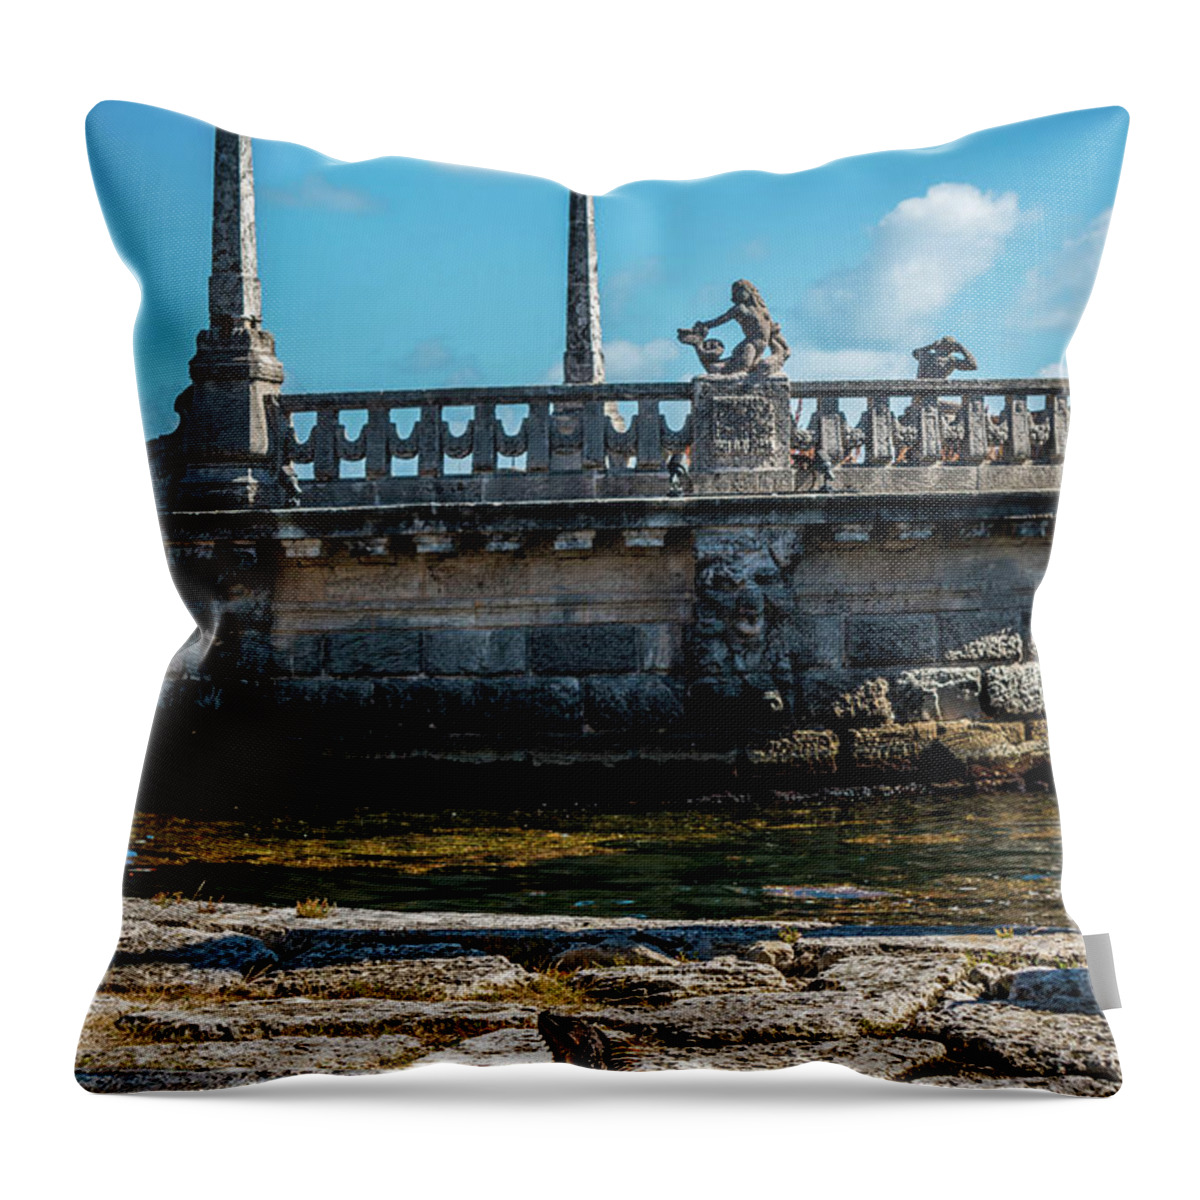 Deering Throw Pillow featuring the photograph Iguana at Vizcaya Barge by Susie Weaver